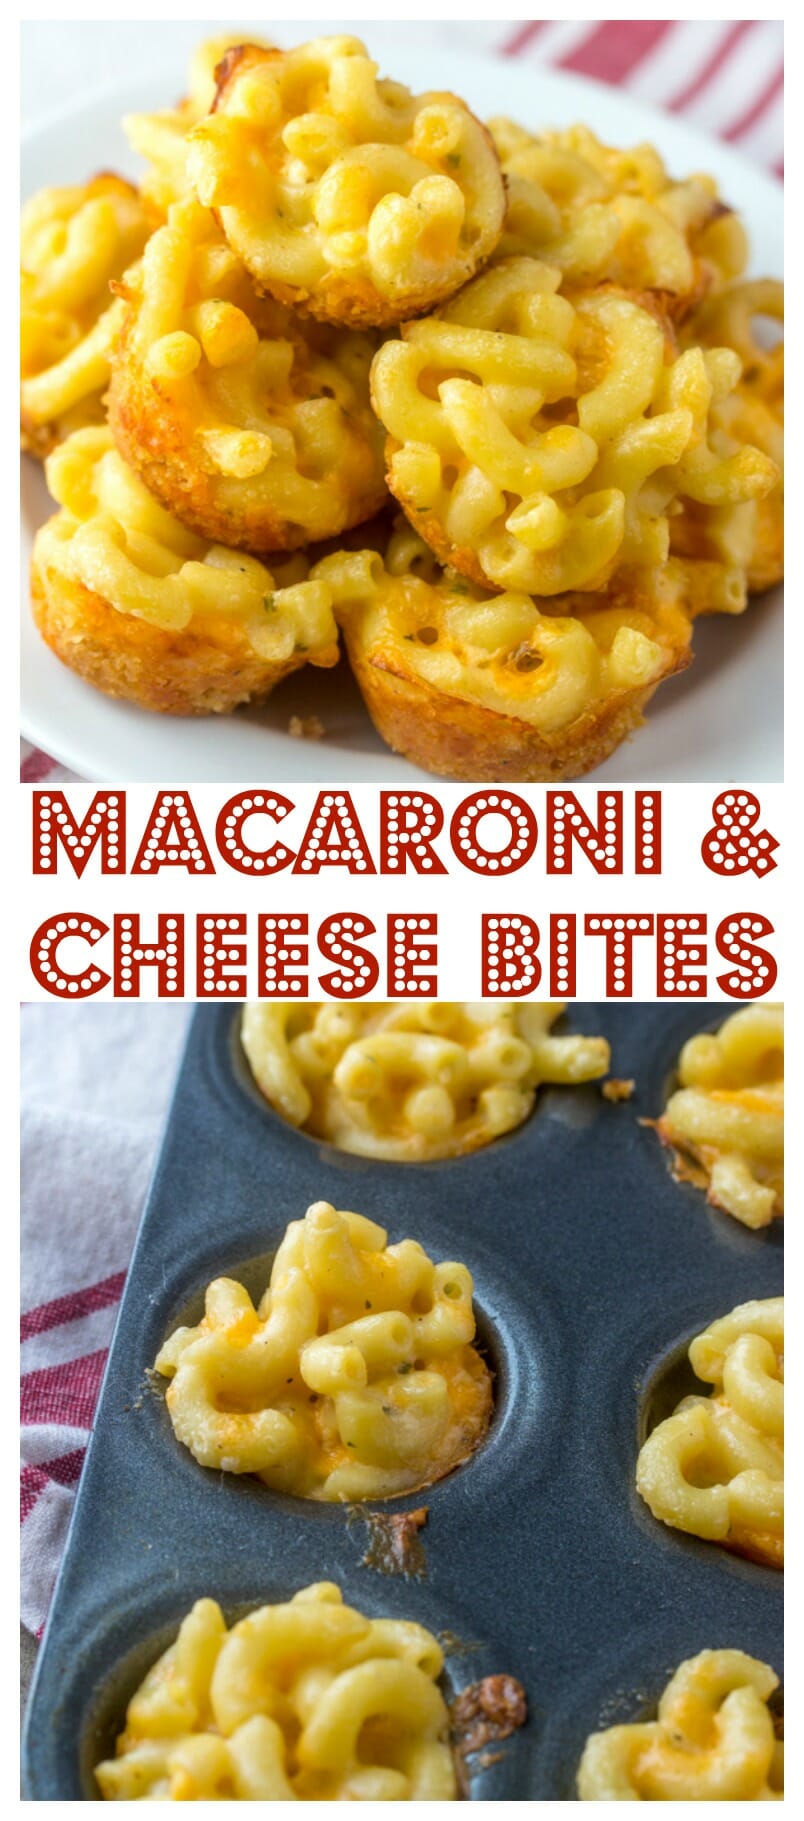 Mini Macaroni and Cheese Bites, everyone's favorite side dish recipe in appetizer form! Perfect for the Super Bowl or any sports party!